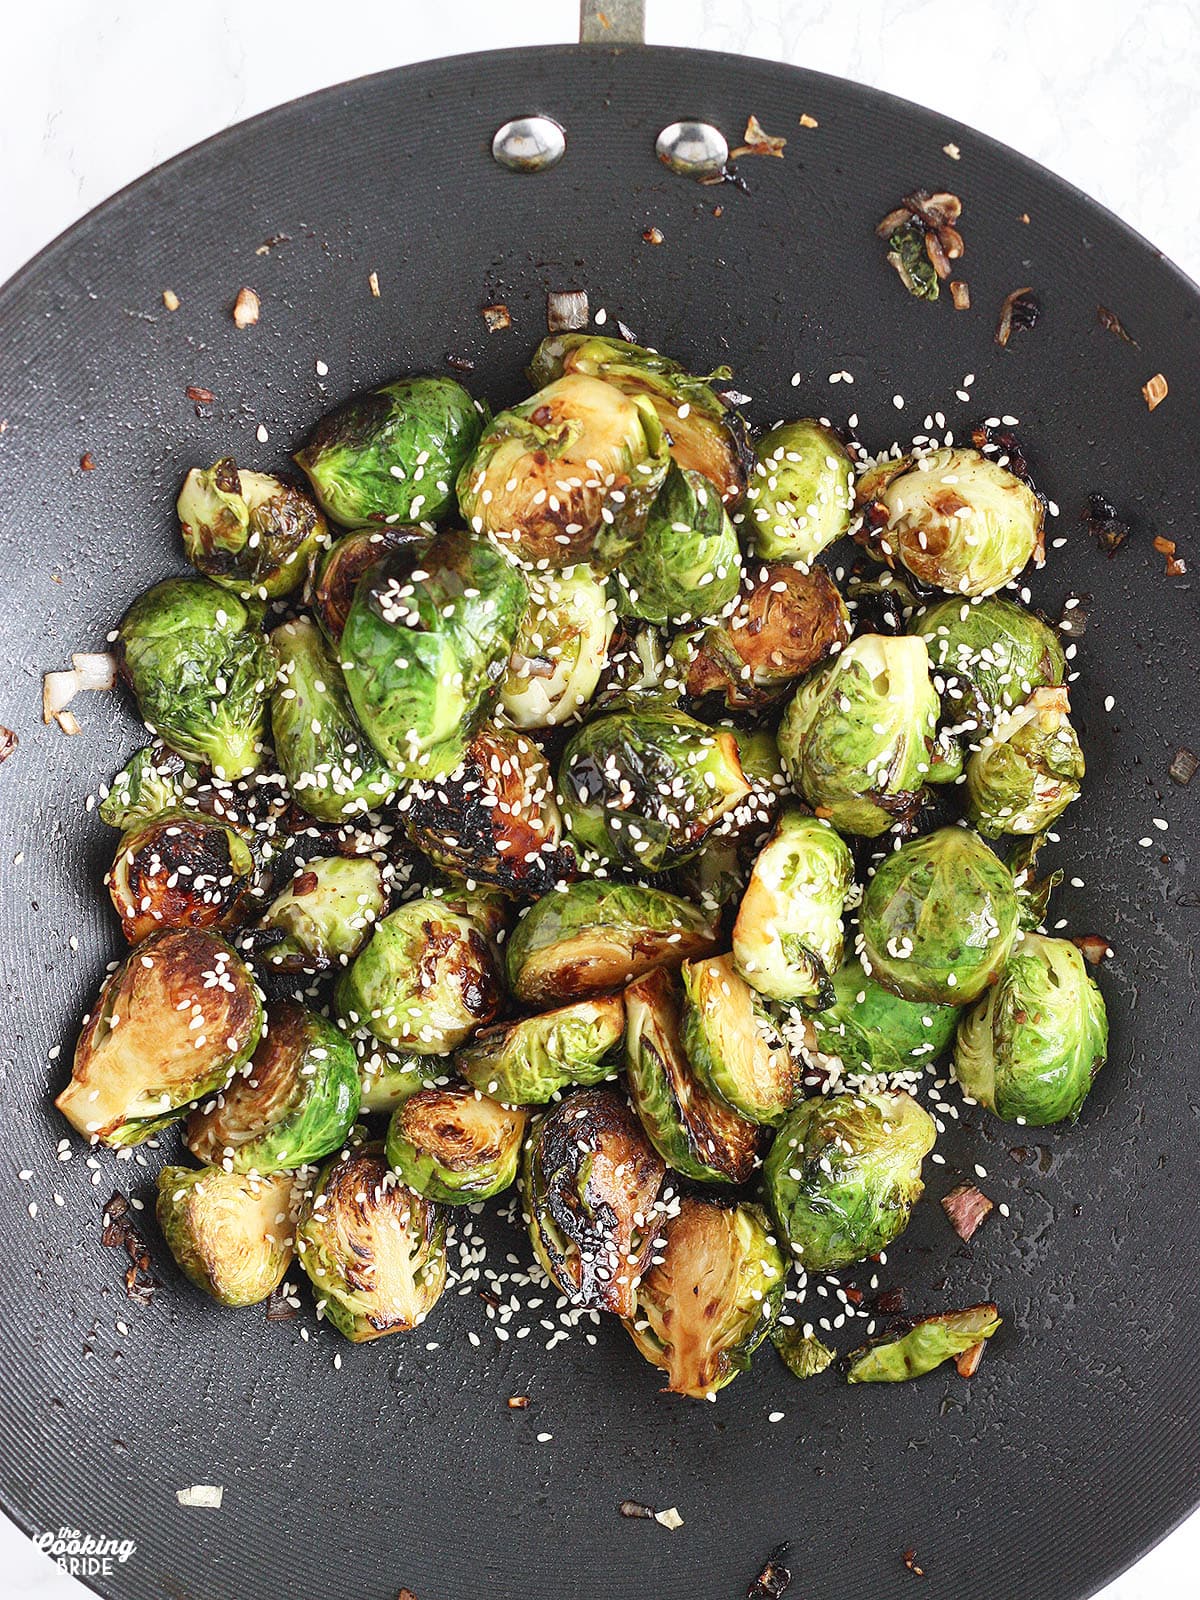 Stir Fried Brussels sprouts garnished with sesame seeds in a wok.